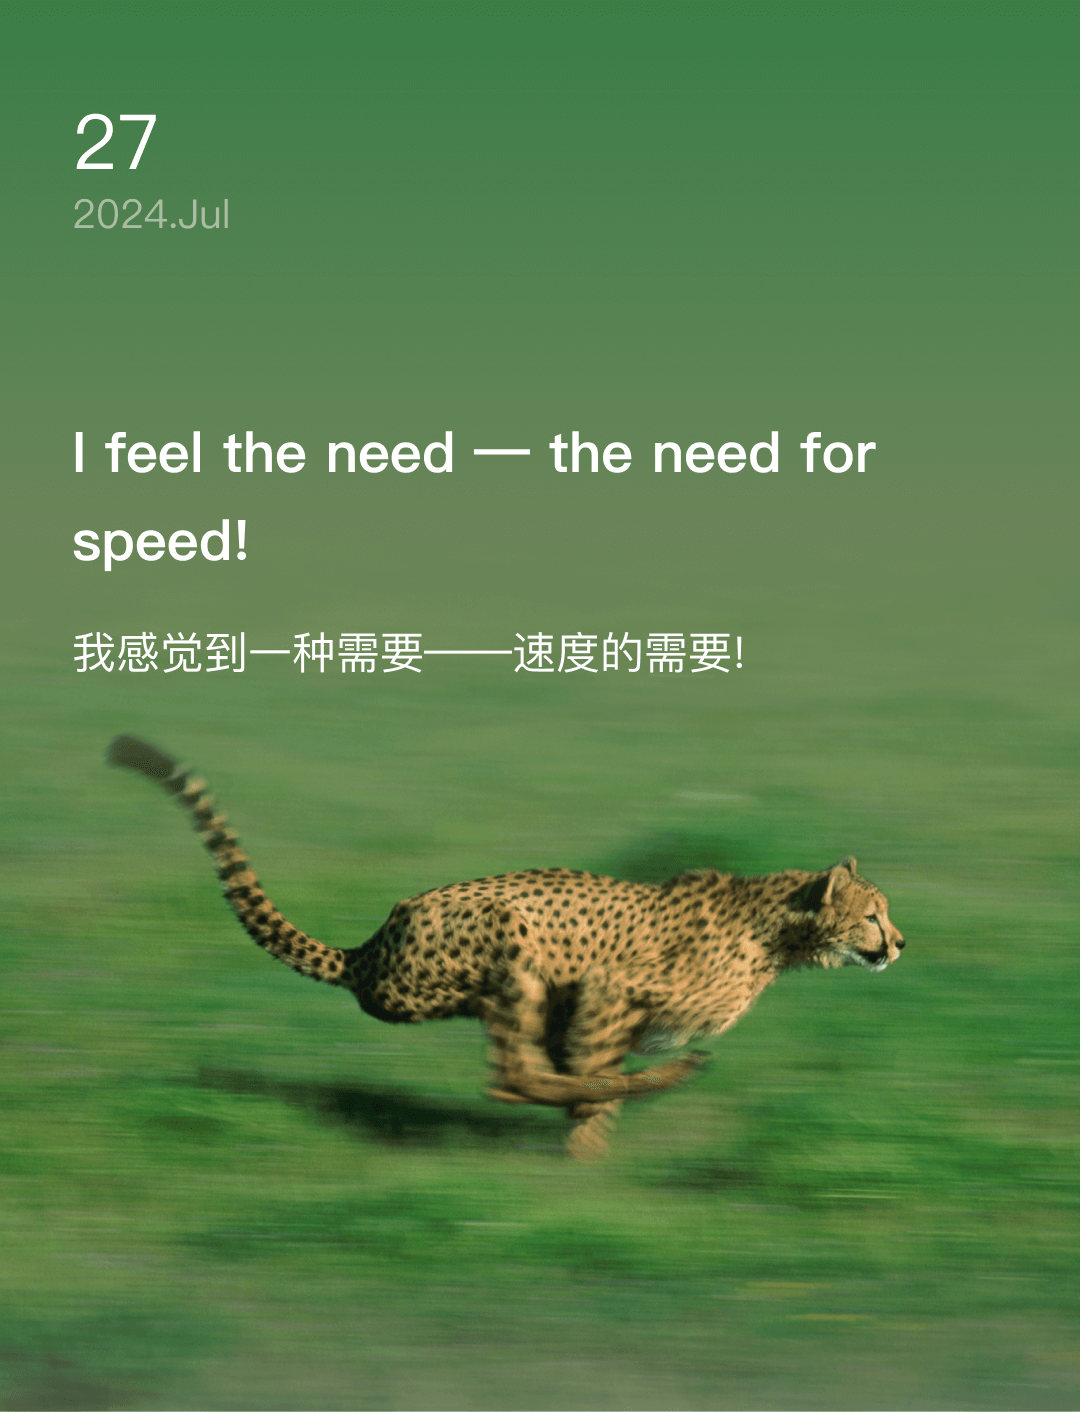 I feel the need — the need for speed!